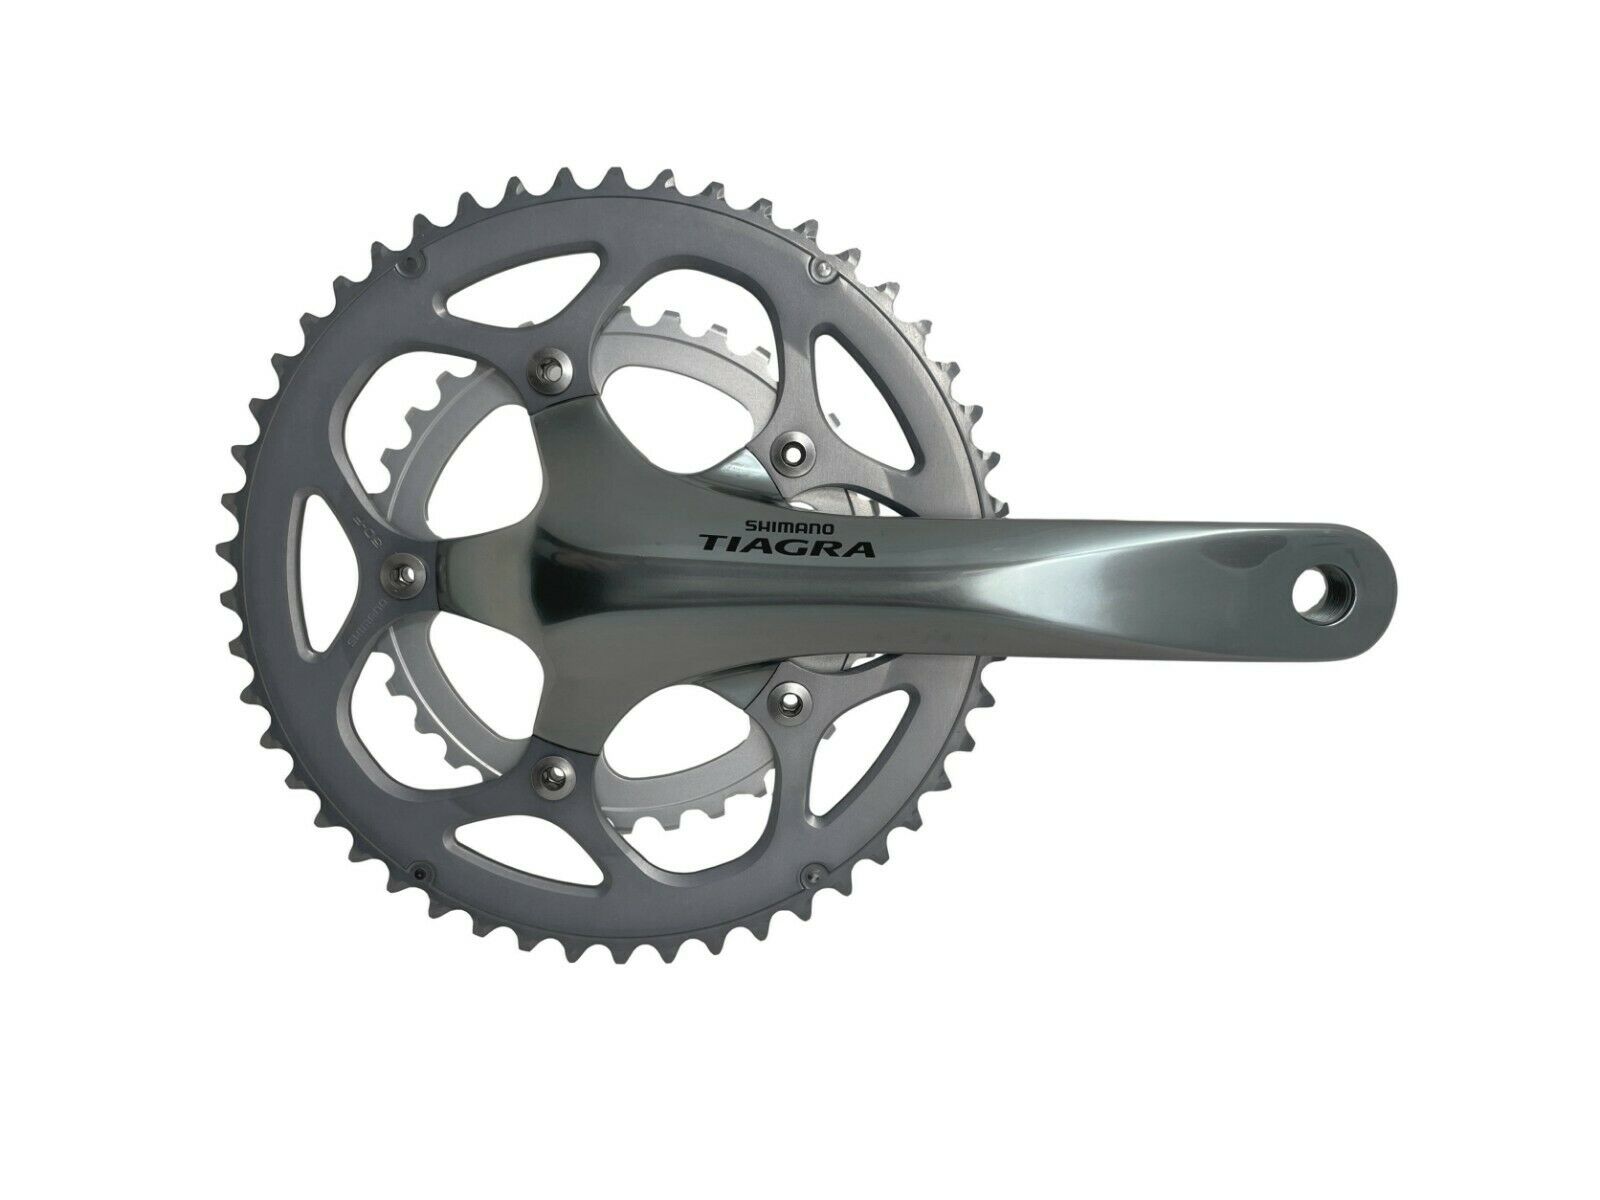 Shimano Tiagra FC-4550 50 / 34 Tooth Compact 10 Speed Chainset